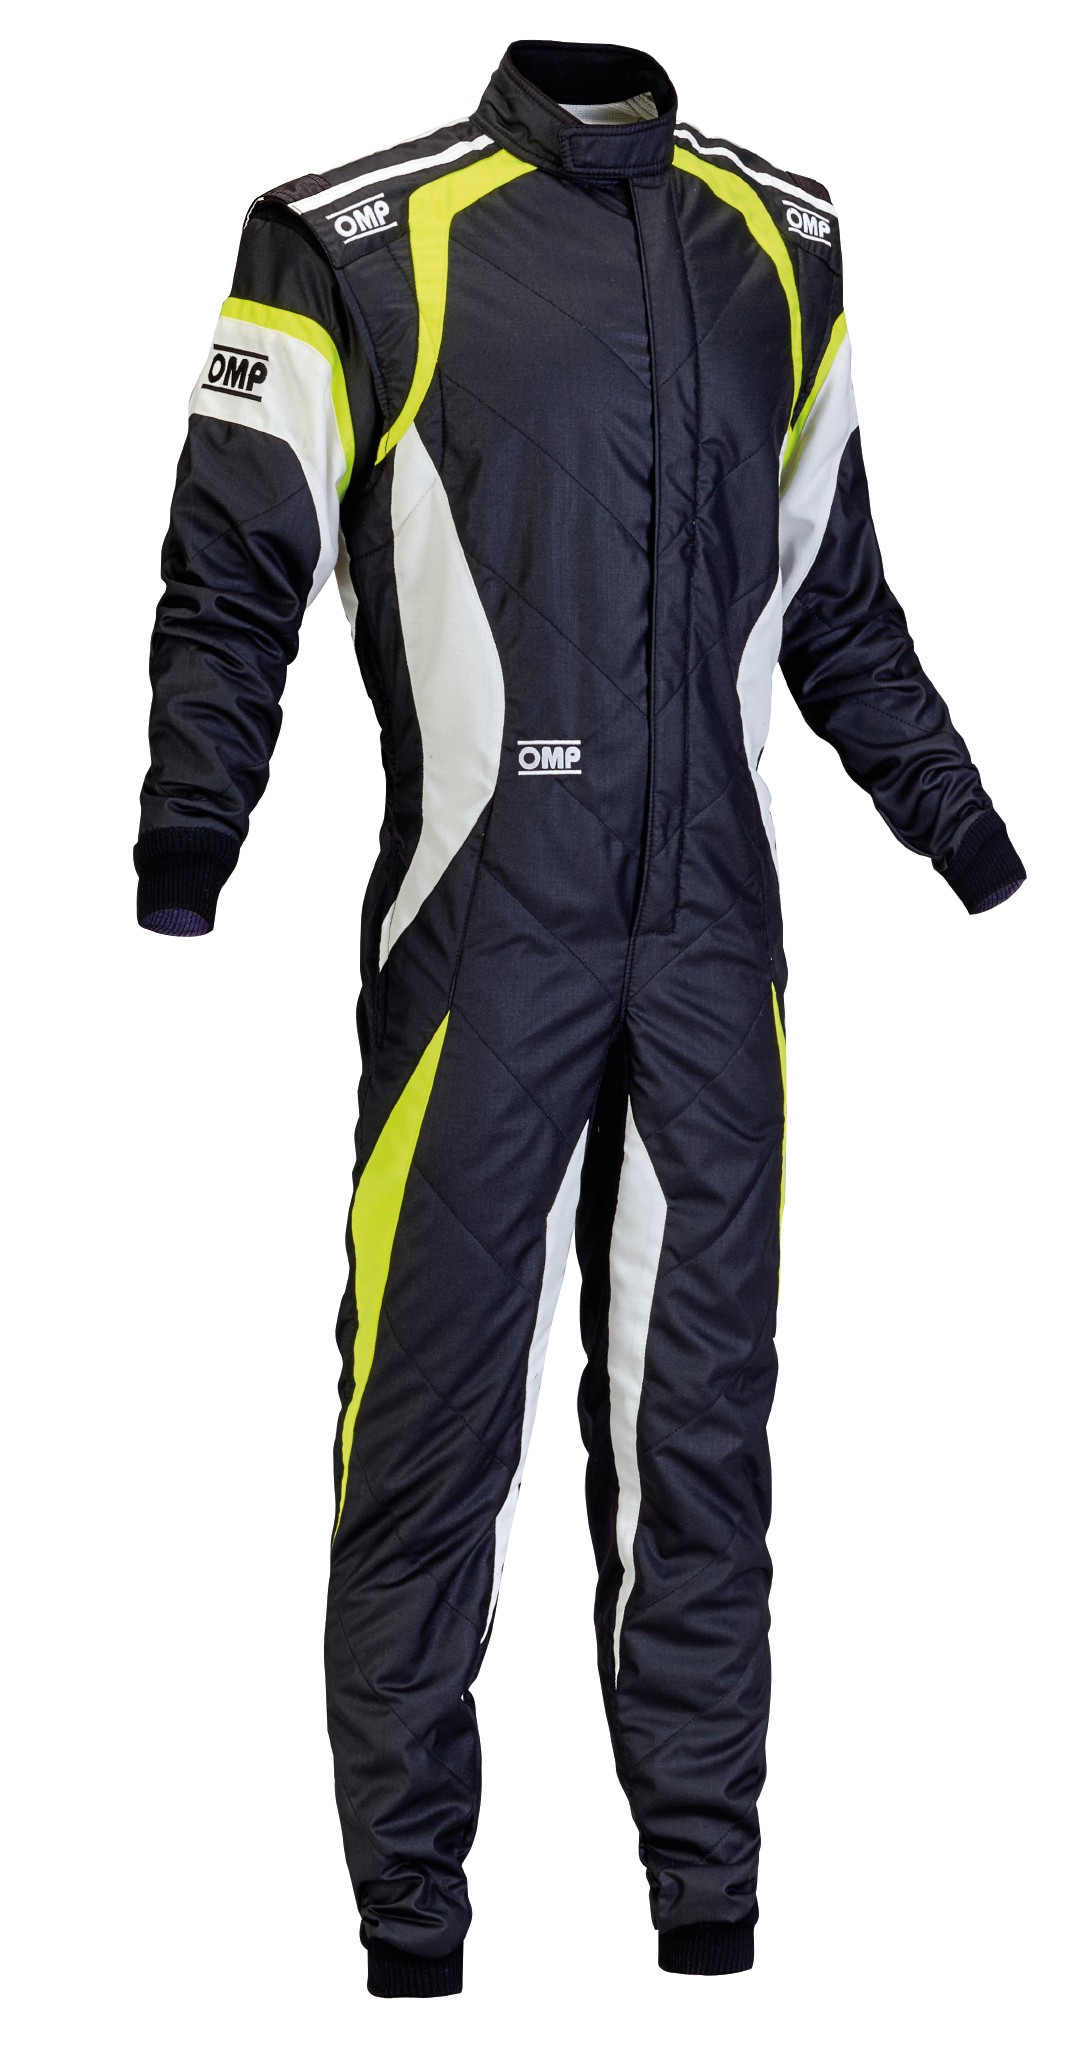 OMP IA0183708352 One S Racing Suit, Silver, Size 52 